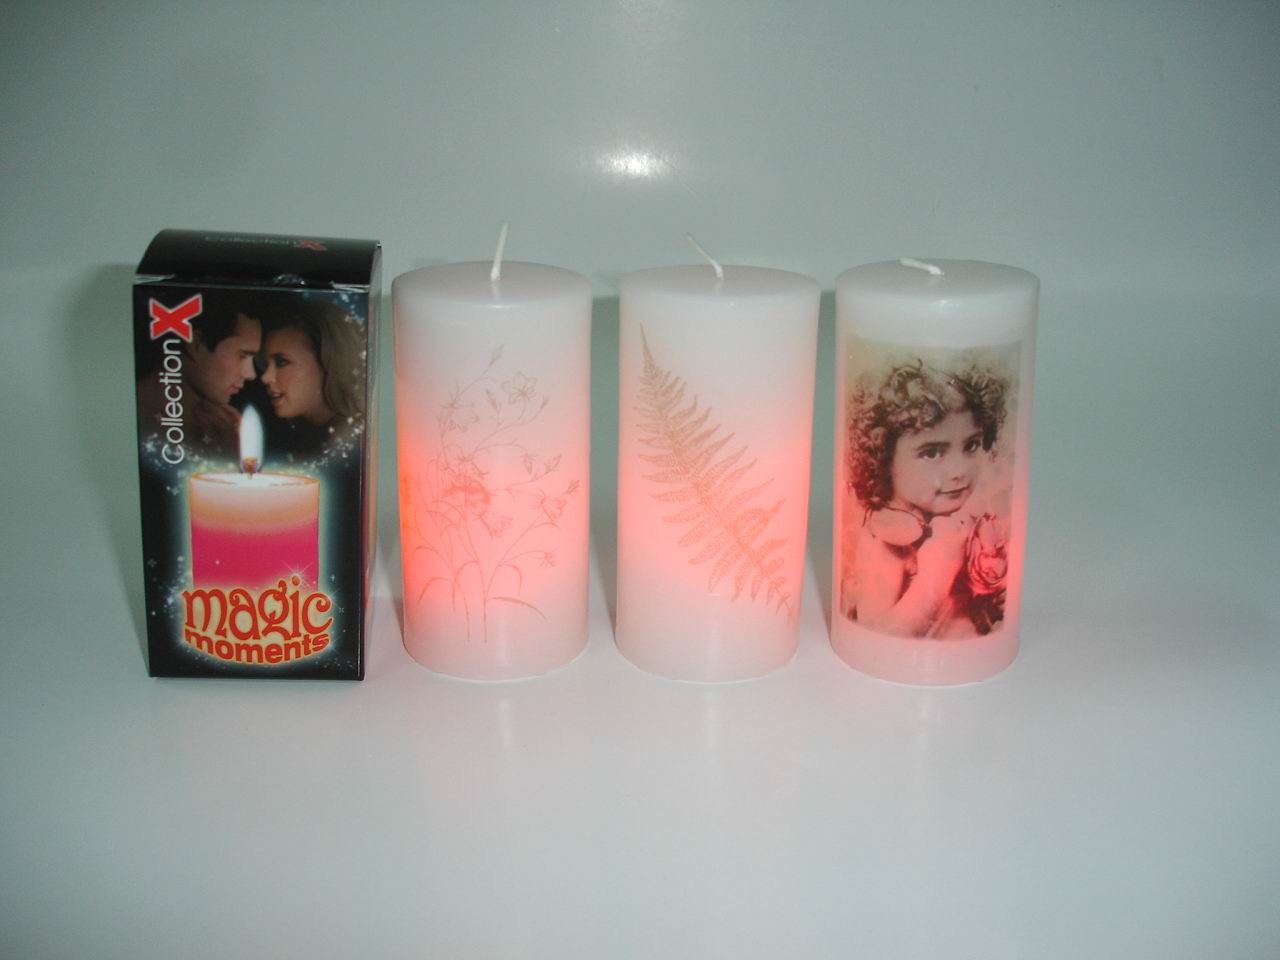 LED Candle with real Flame